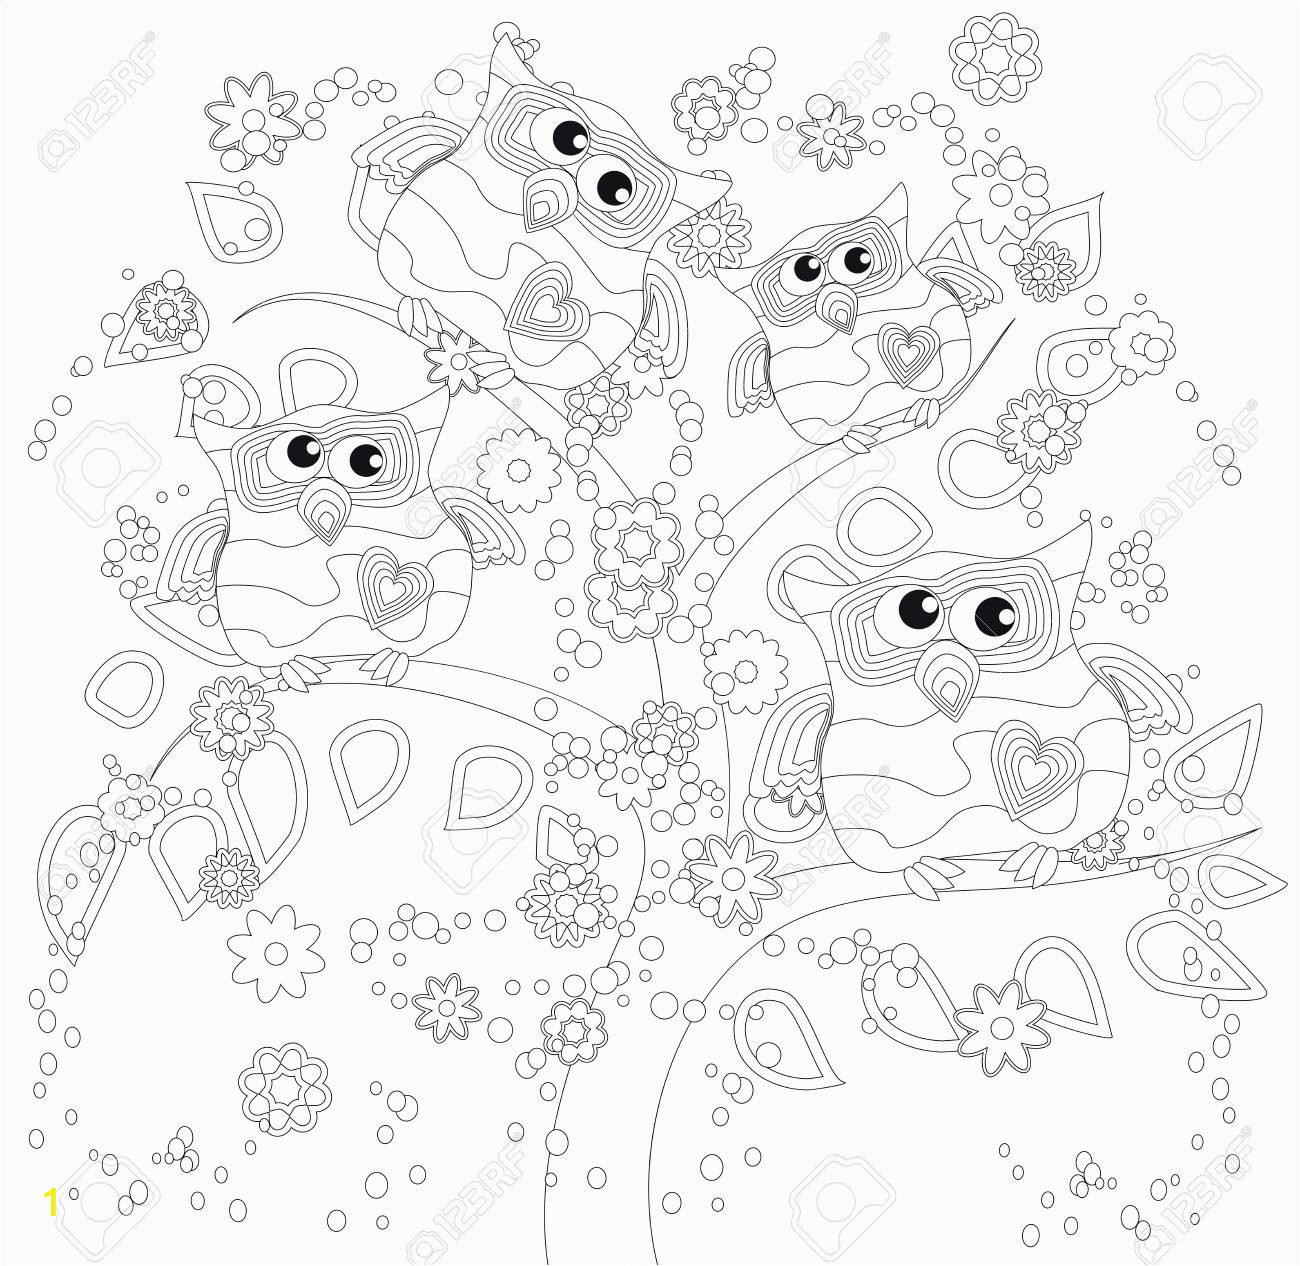 coloring book for adult and older children coloring page with cute owl and floral frame